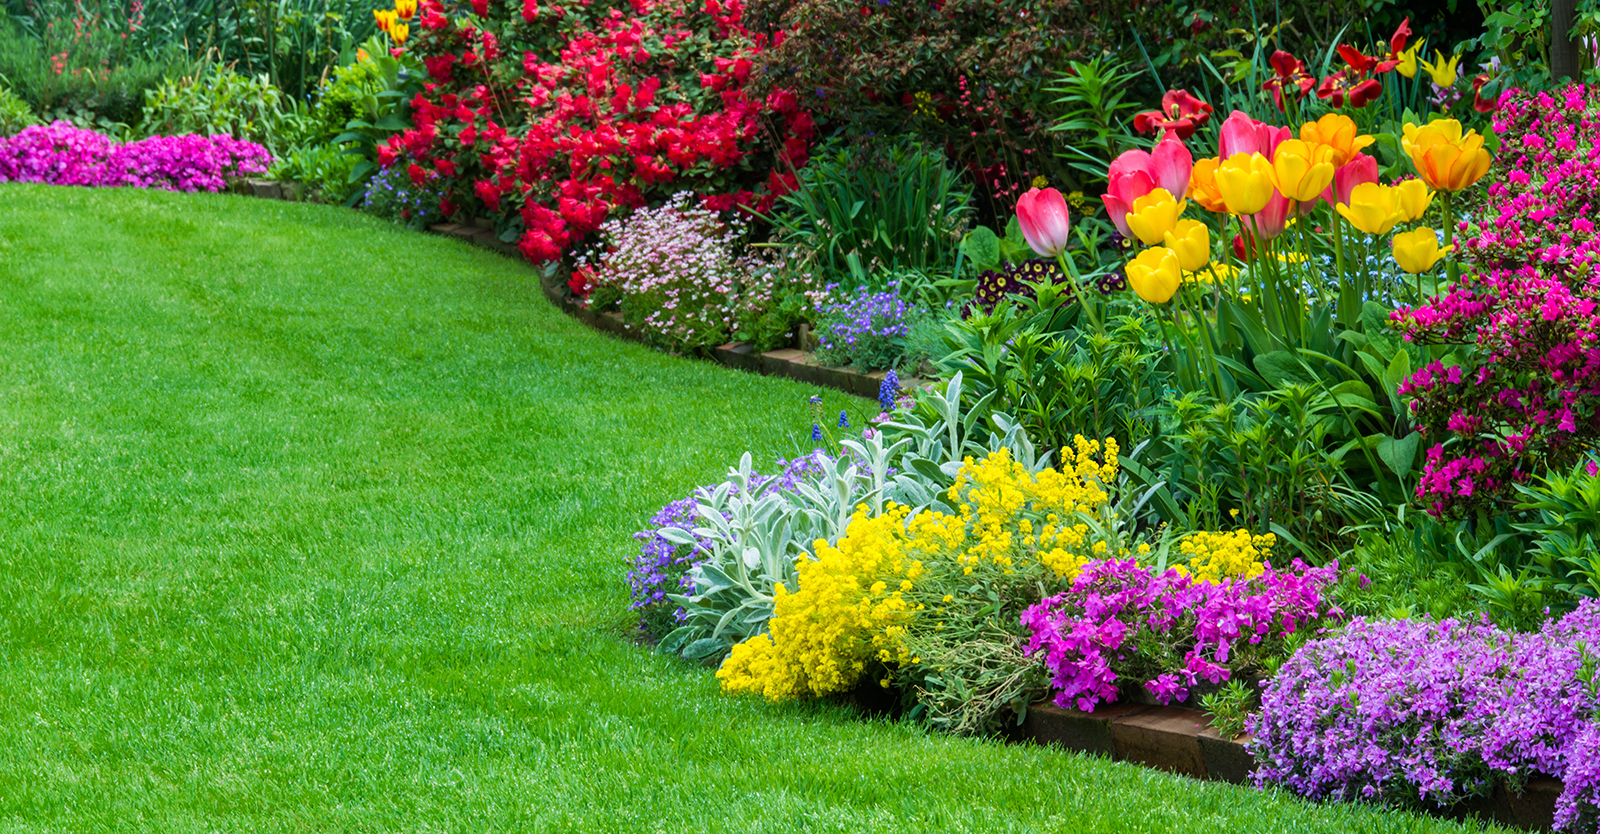 A colorful array of bright multi-colored flowers in a garden bordering a lawn.